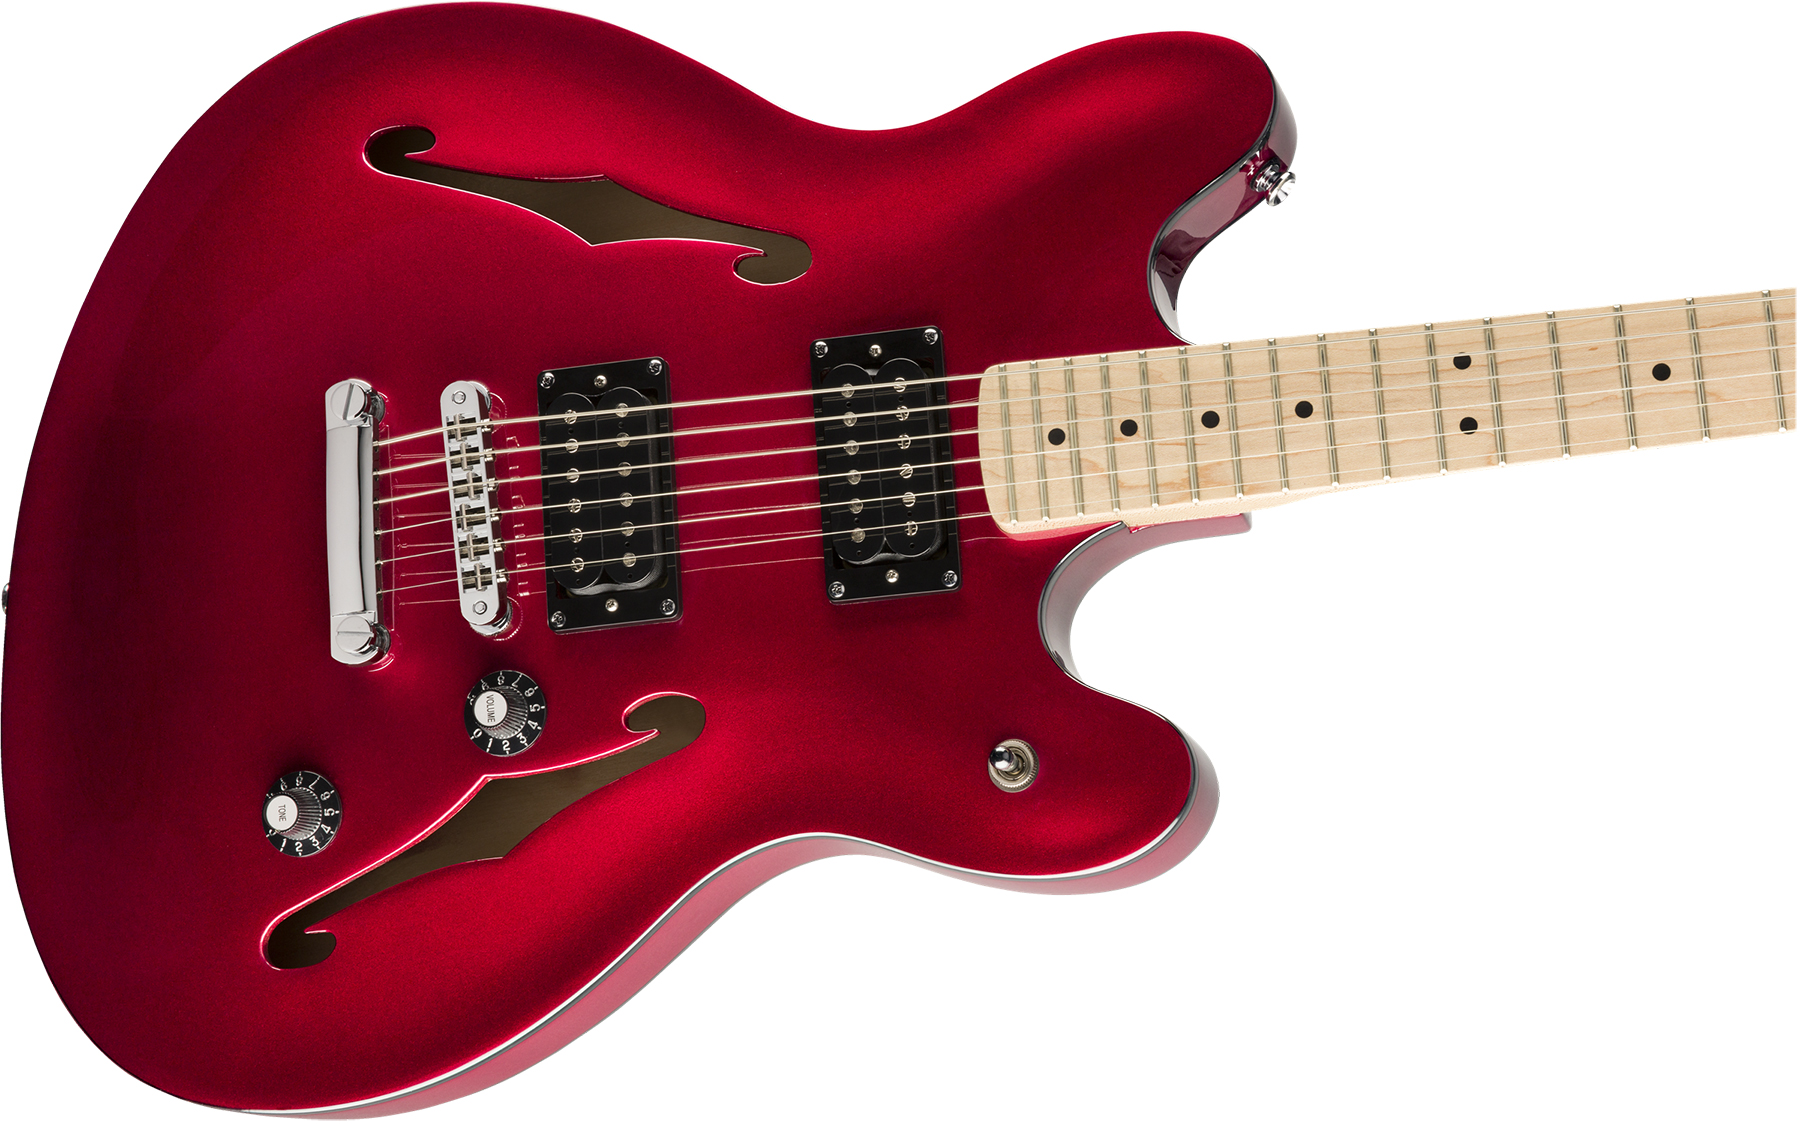 Squier Starcaster Affinity 2019 Hh Ht Mn - Candy Apple Red - Guitarra eléctrica semi caja - Variation 2